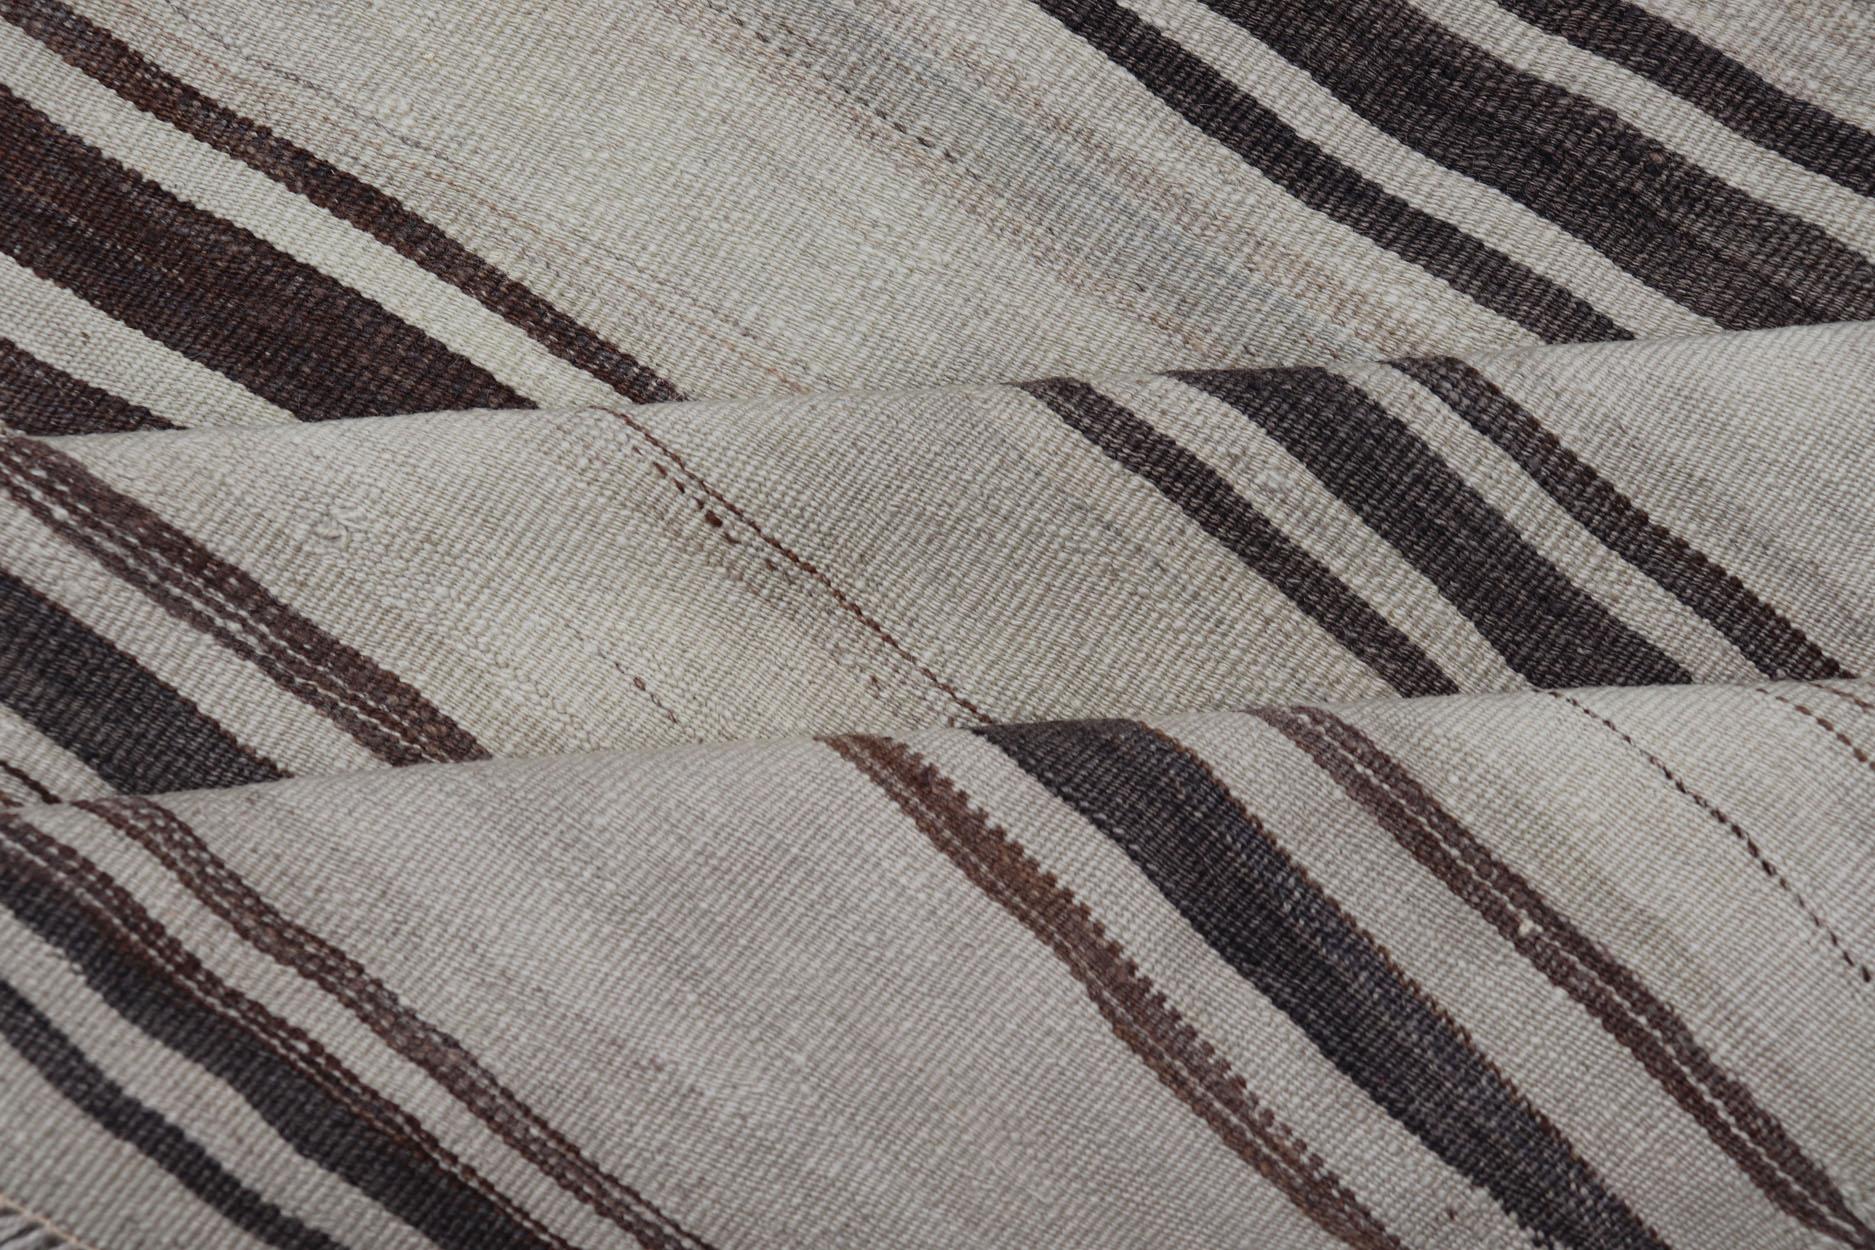 Turkish Vintage Flat-Weave in Shades of Brown and Ivory with Stripe Design For Sale 3